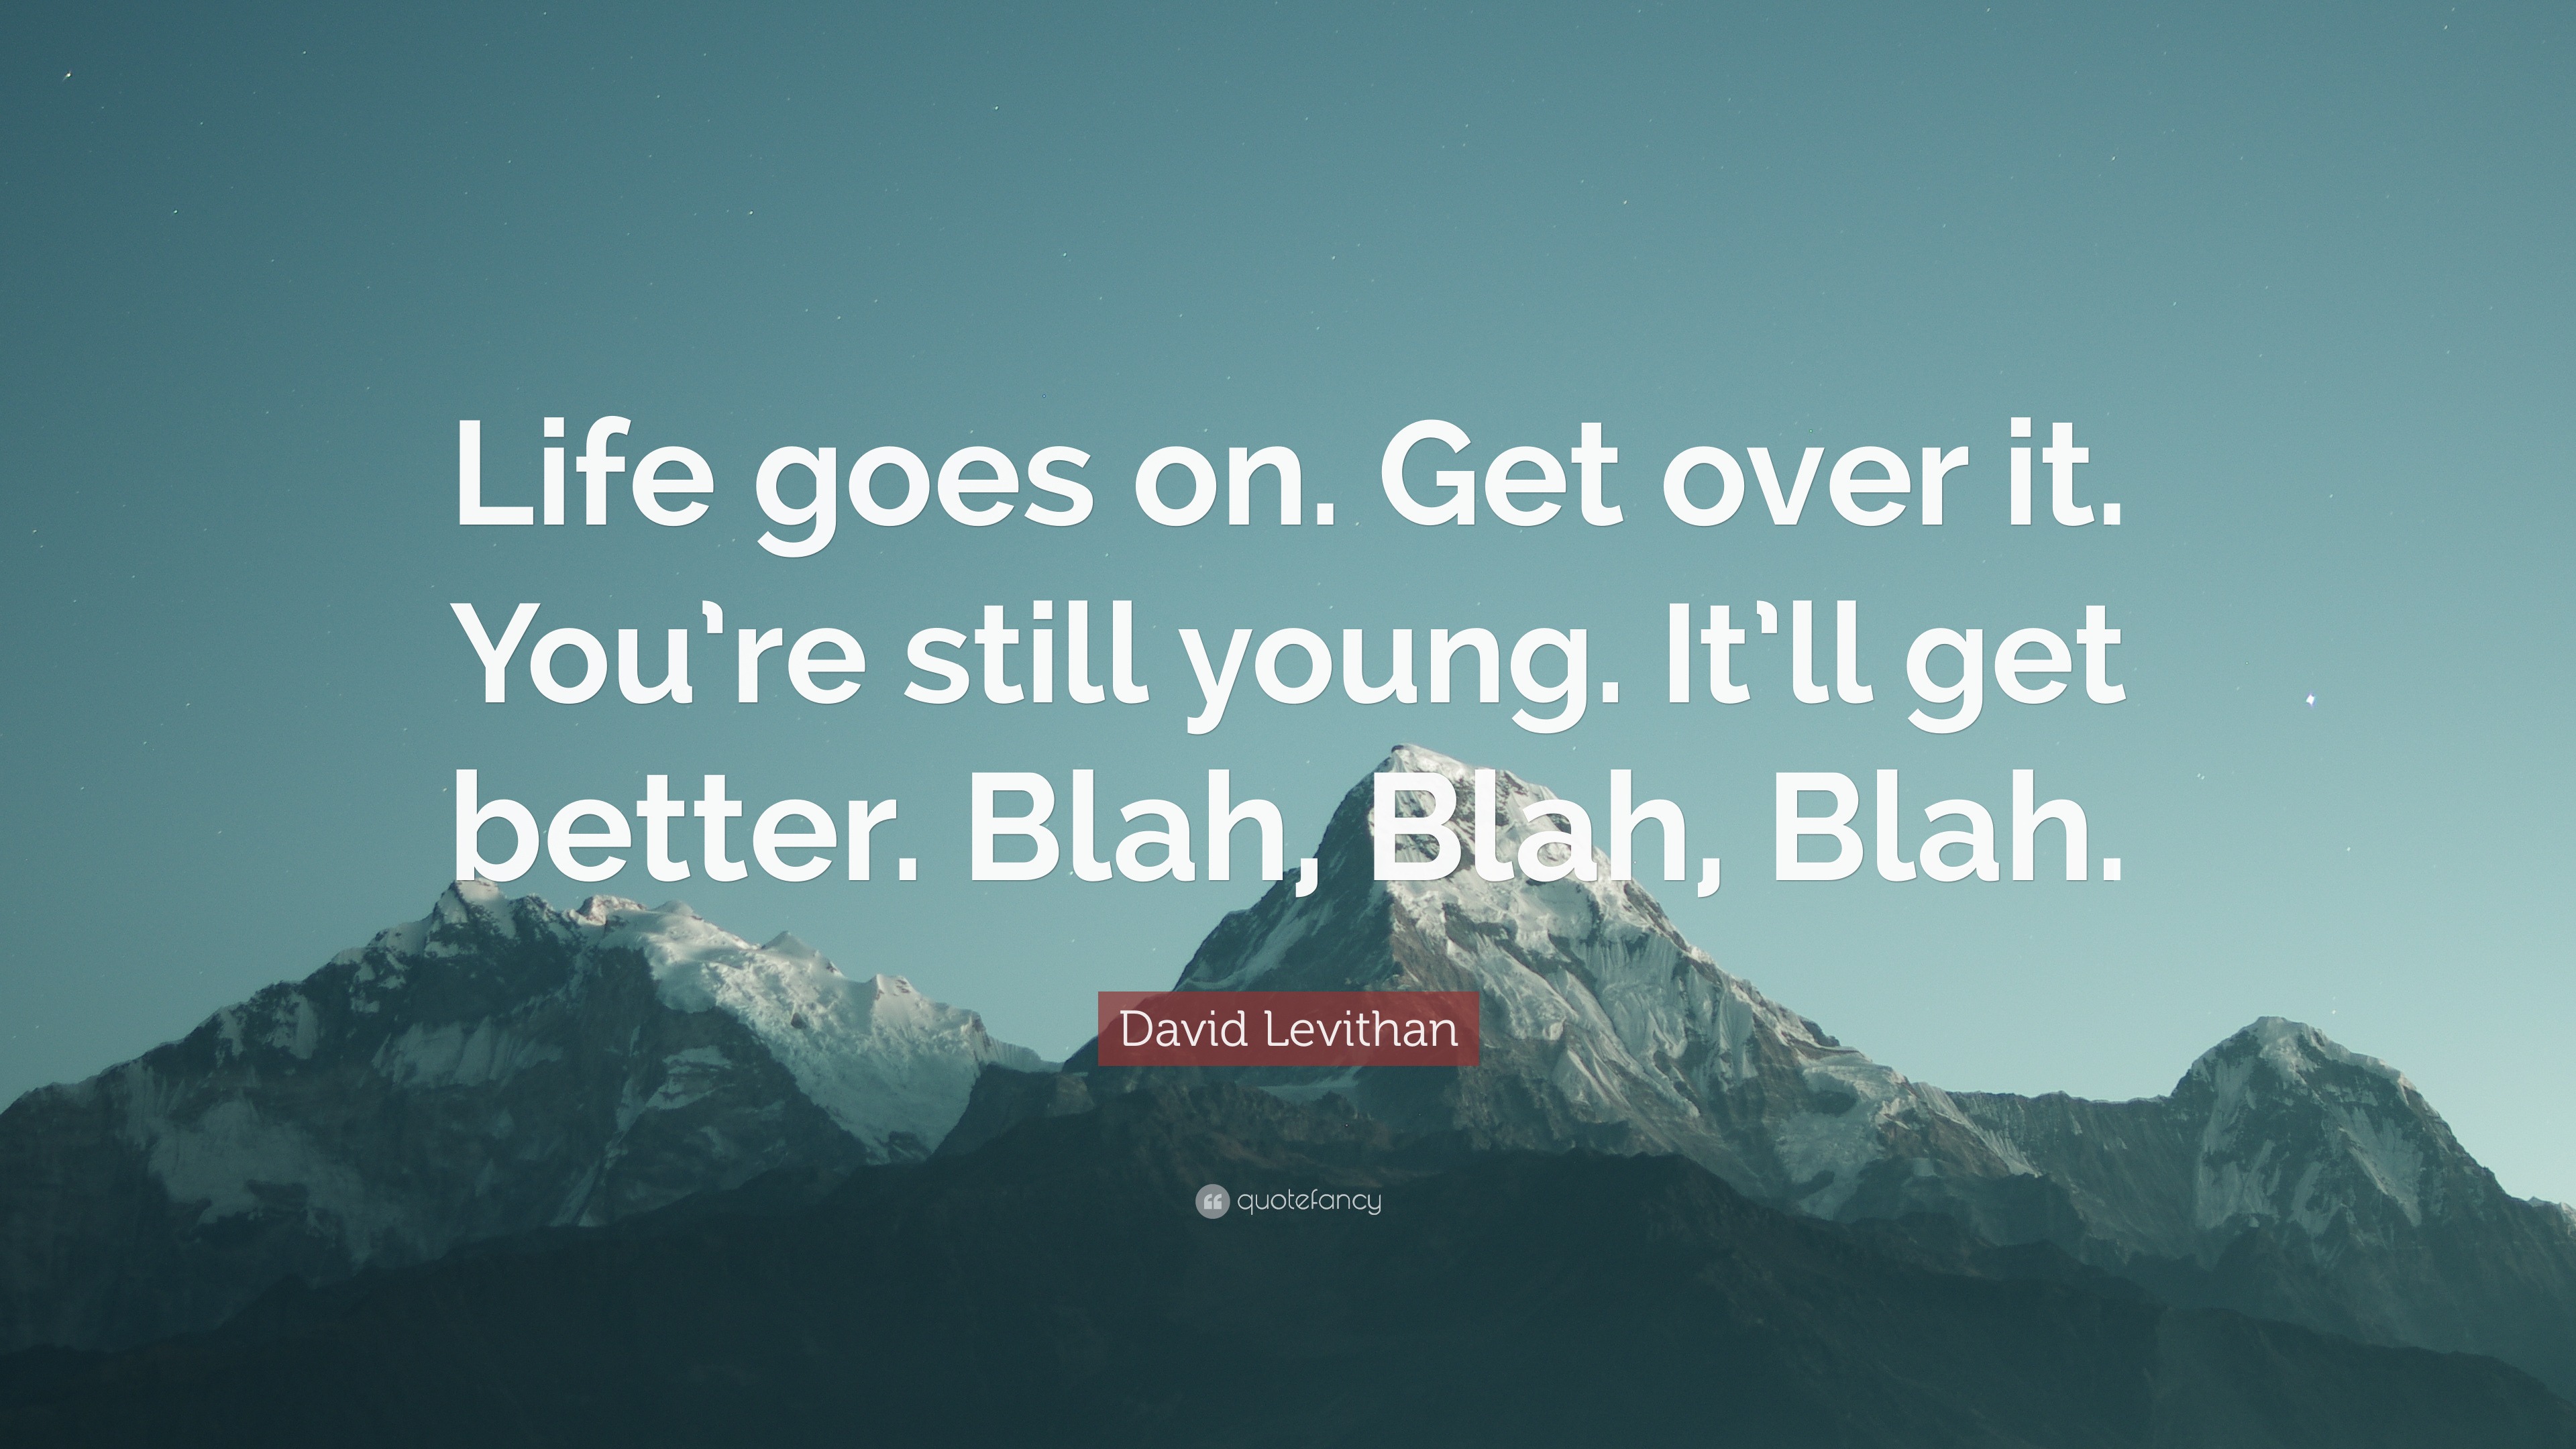 David Levithan Quote “Life goes on Get over it You re